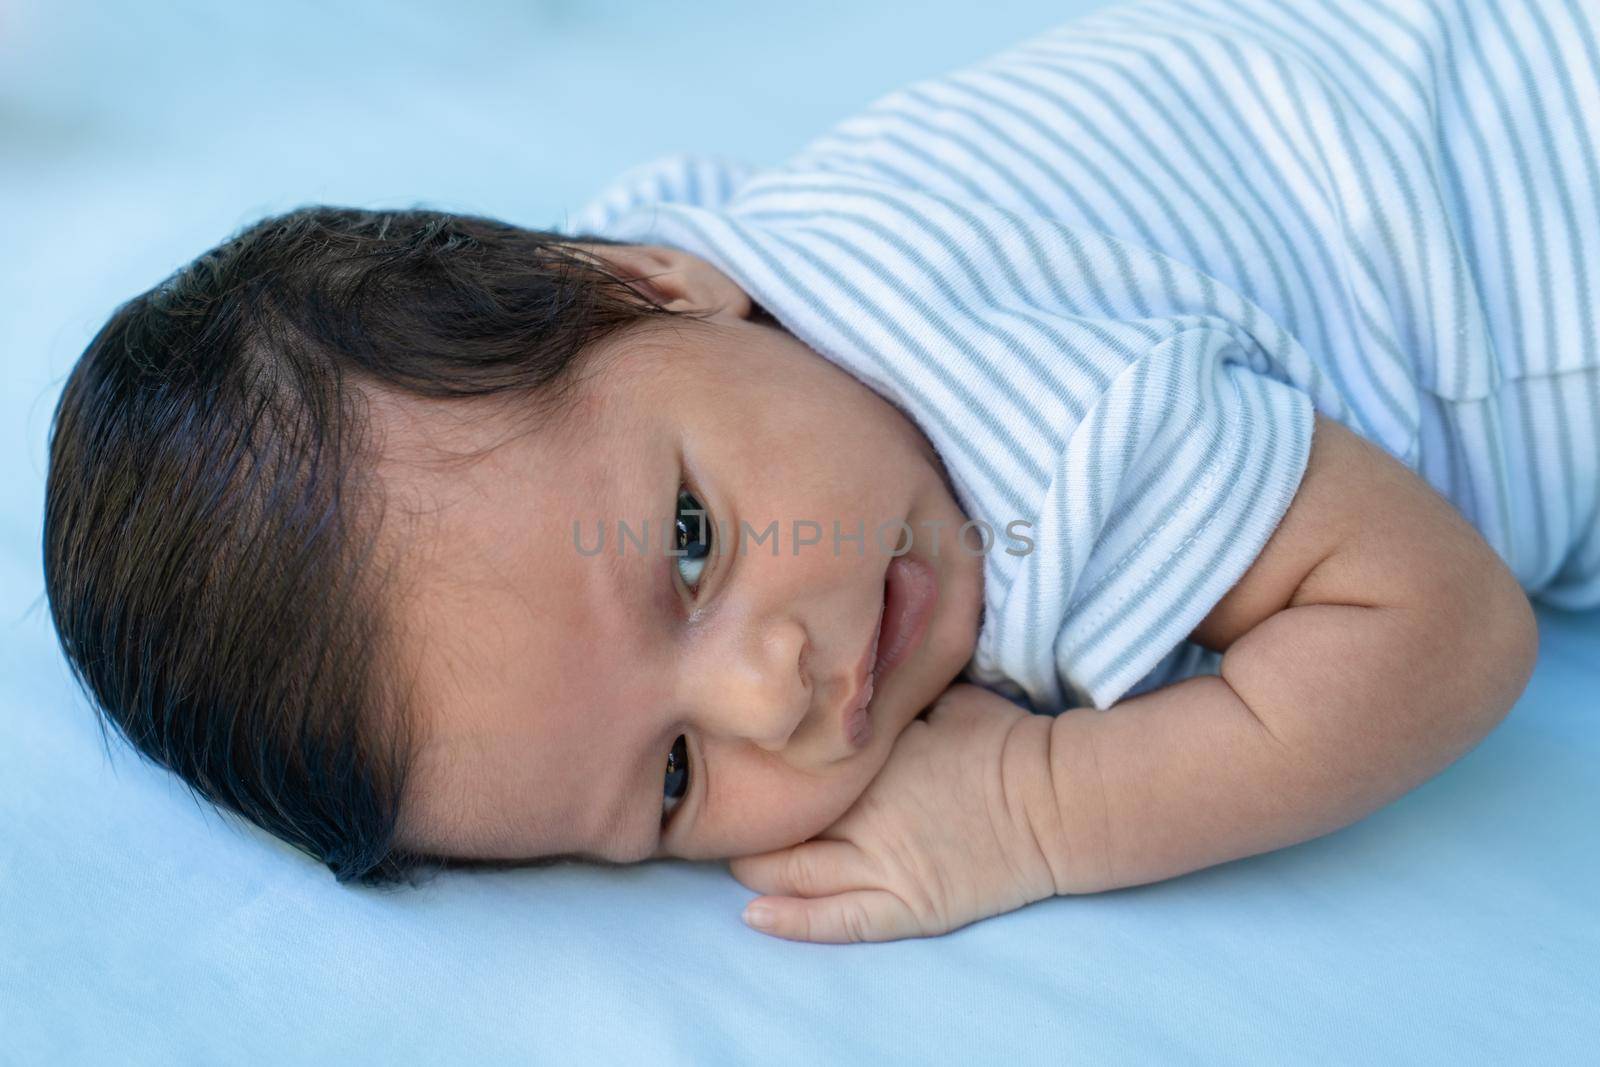 Infant lying on his stomach with his eyes open on a blue diaper